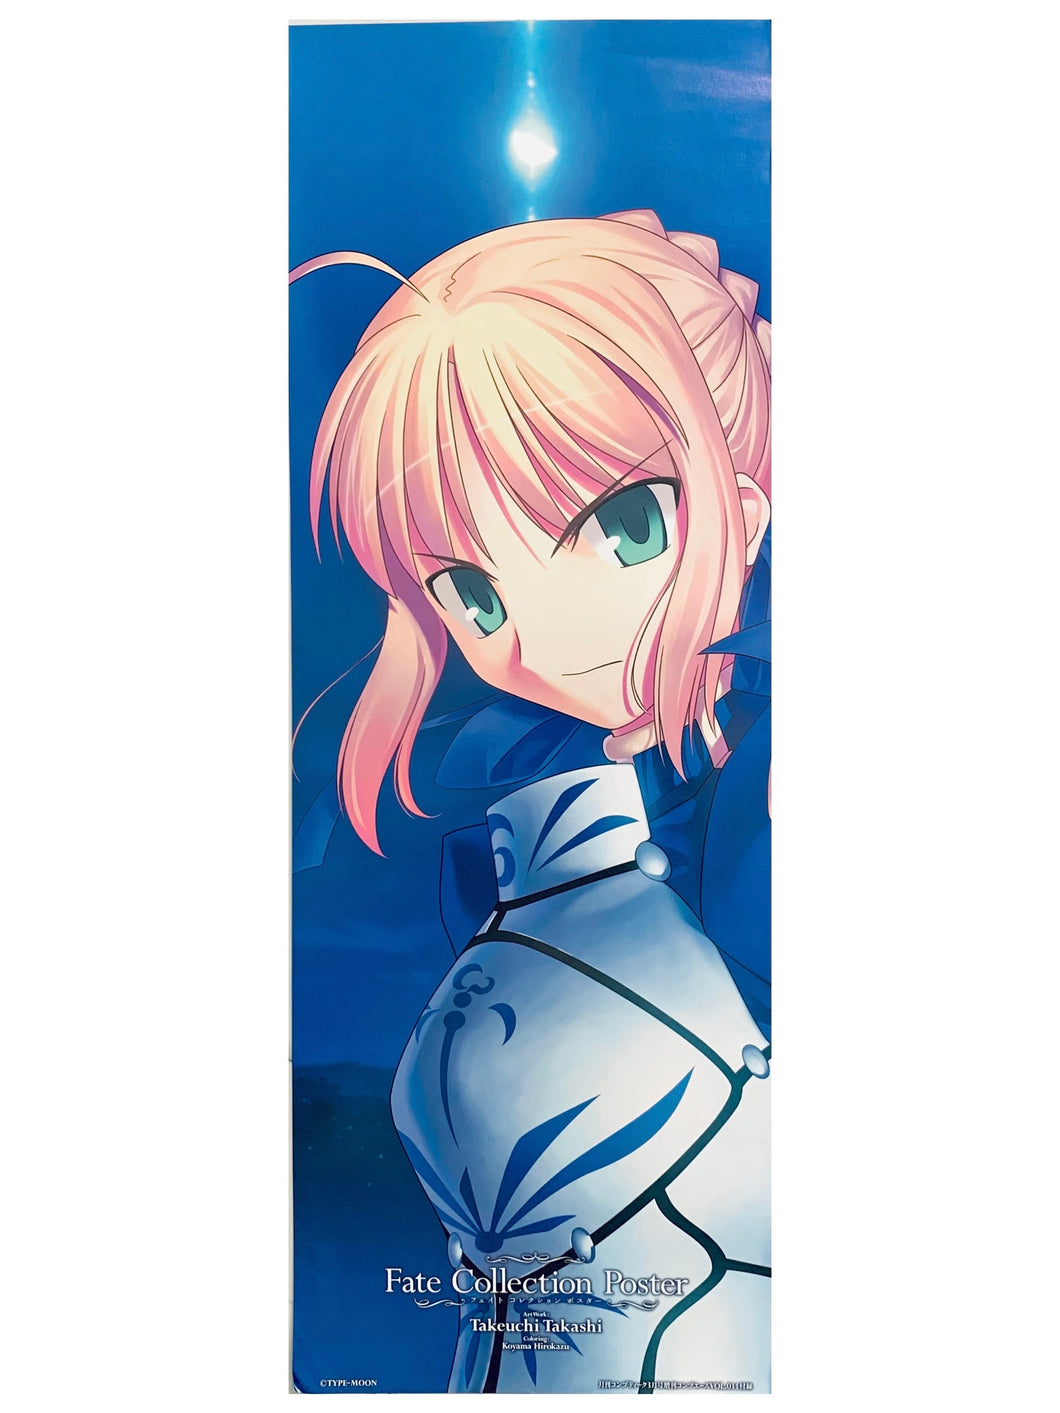 Fate/stay night - Saber - Fate Collection Poster - Comptique March Extra Edition Comp Ace Vol.11 Appendix